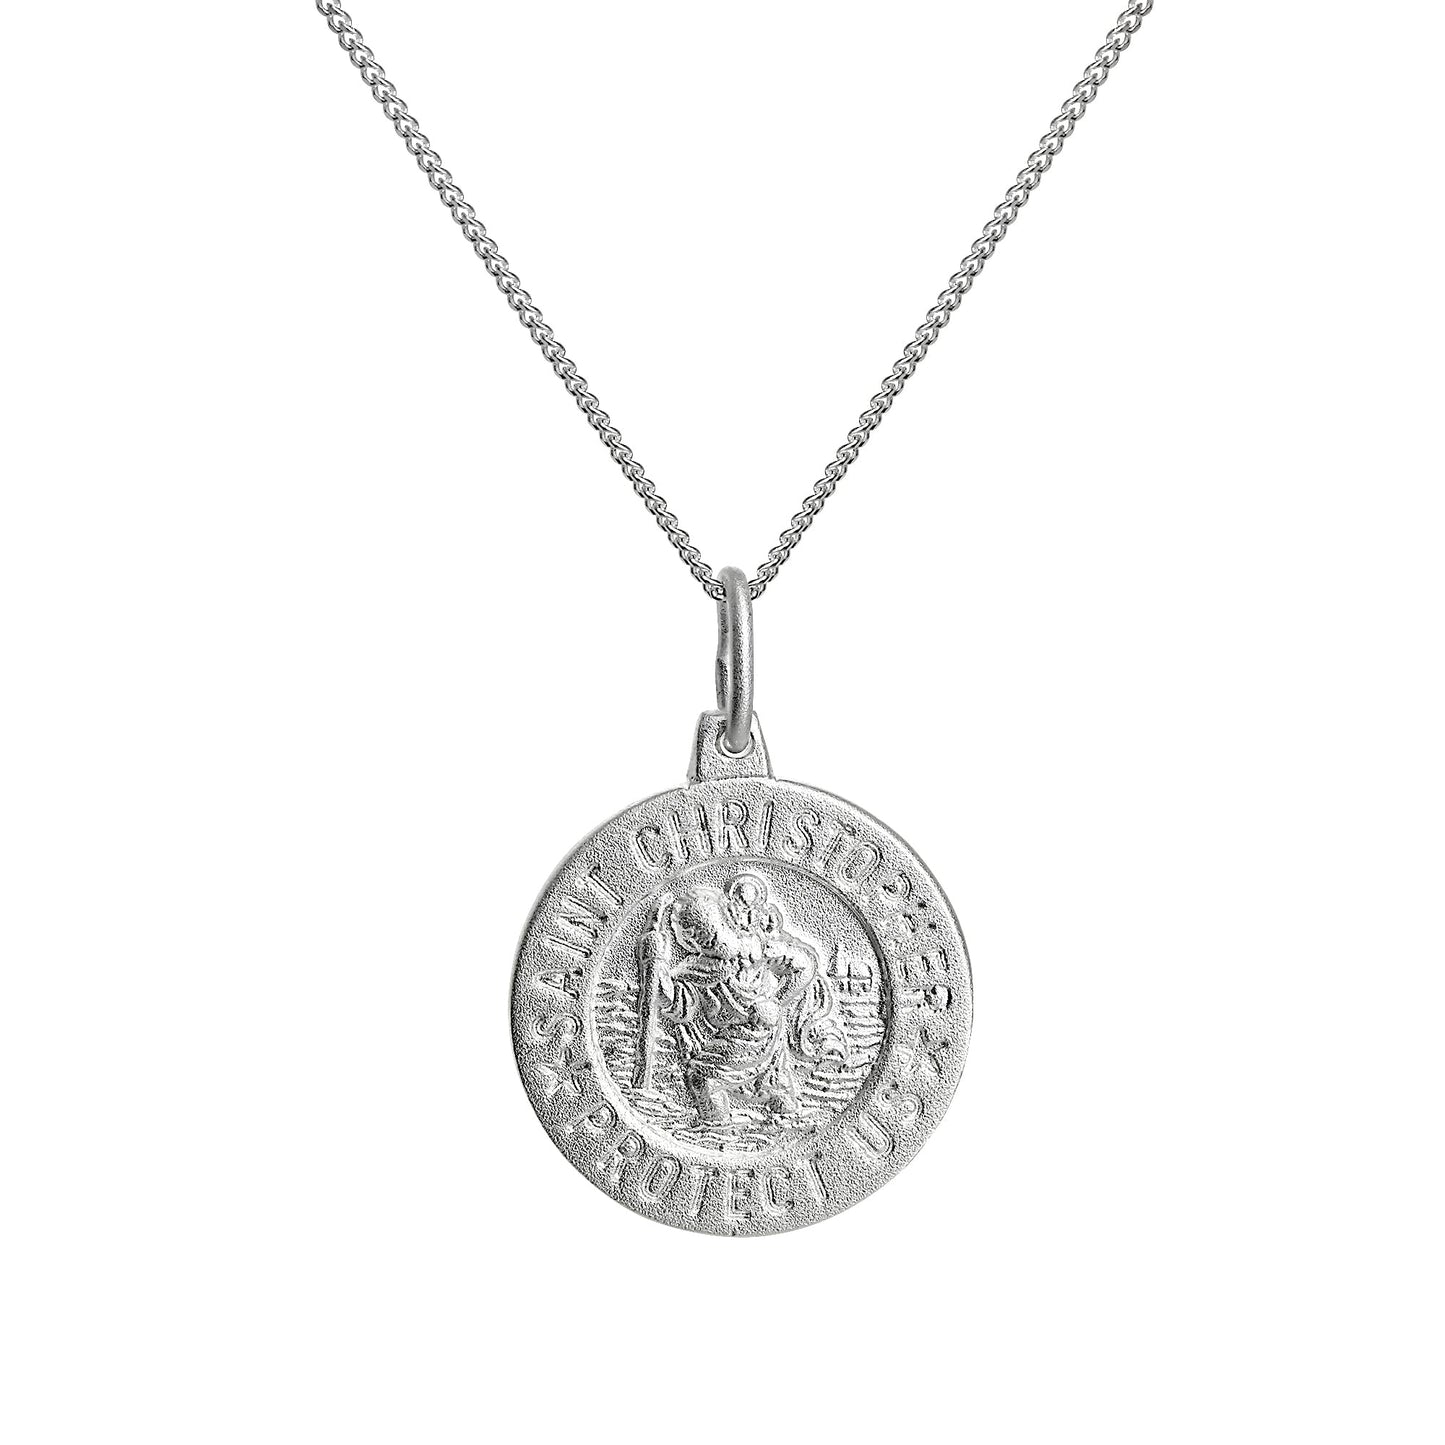 Matt Sterling Silver Saint Christopher Medal Pendant Necklace 16 - 22 Inches